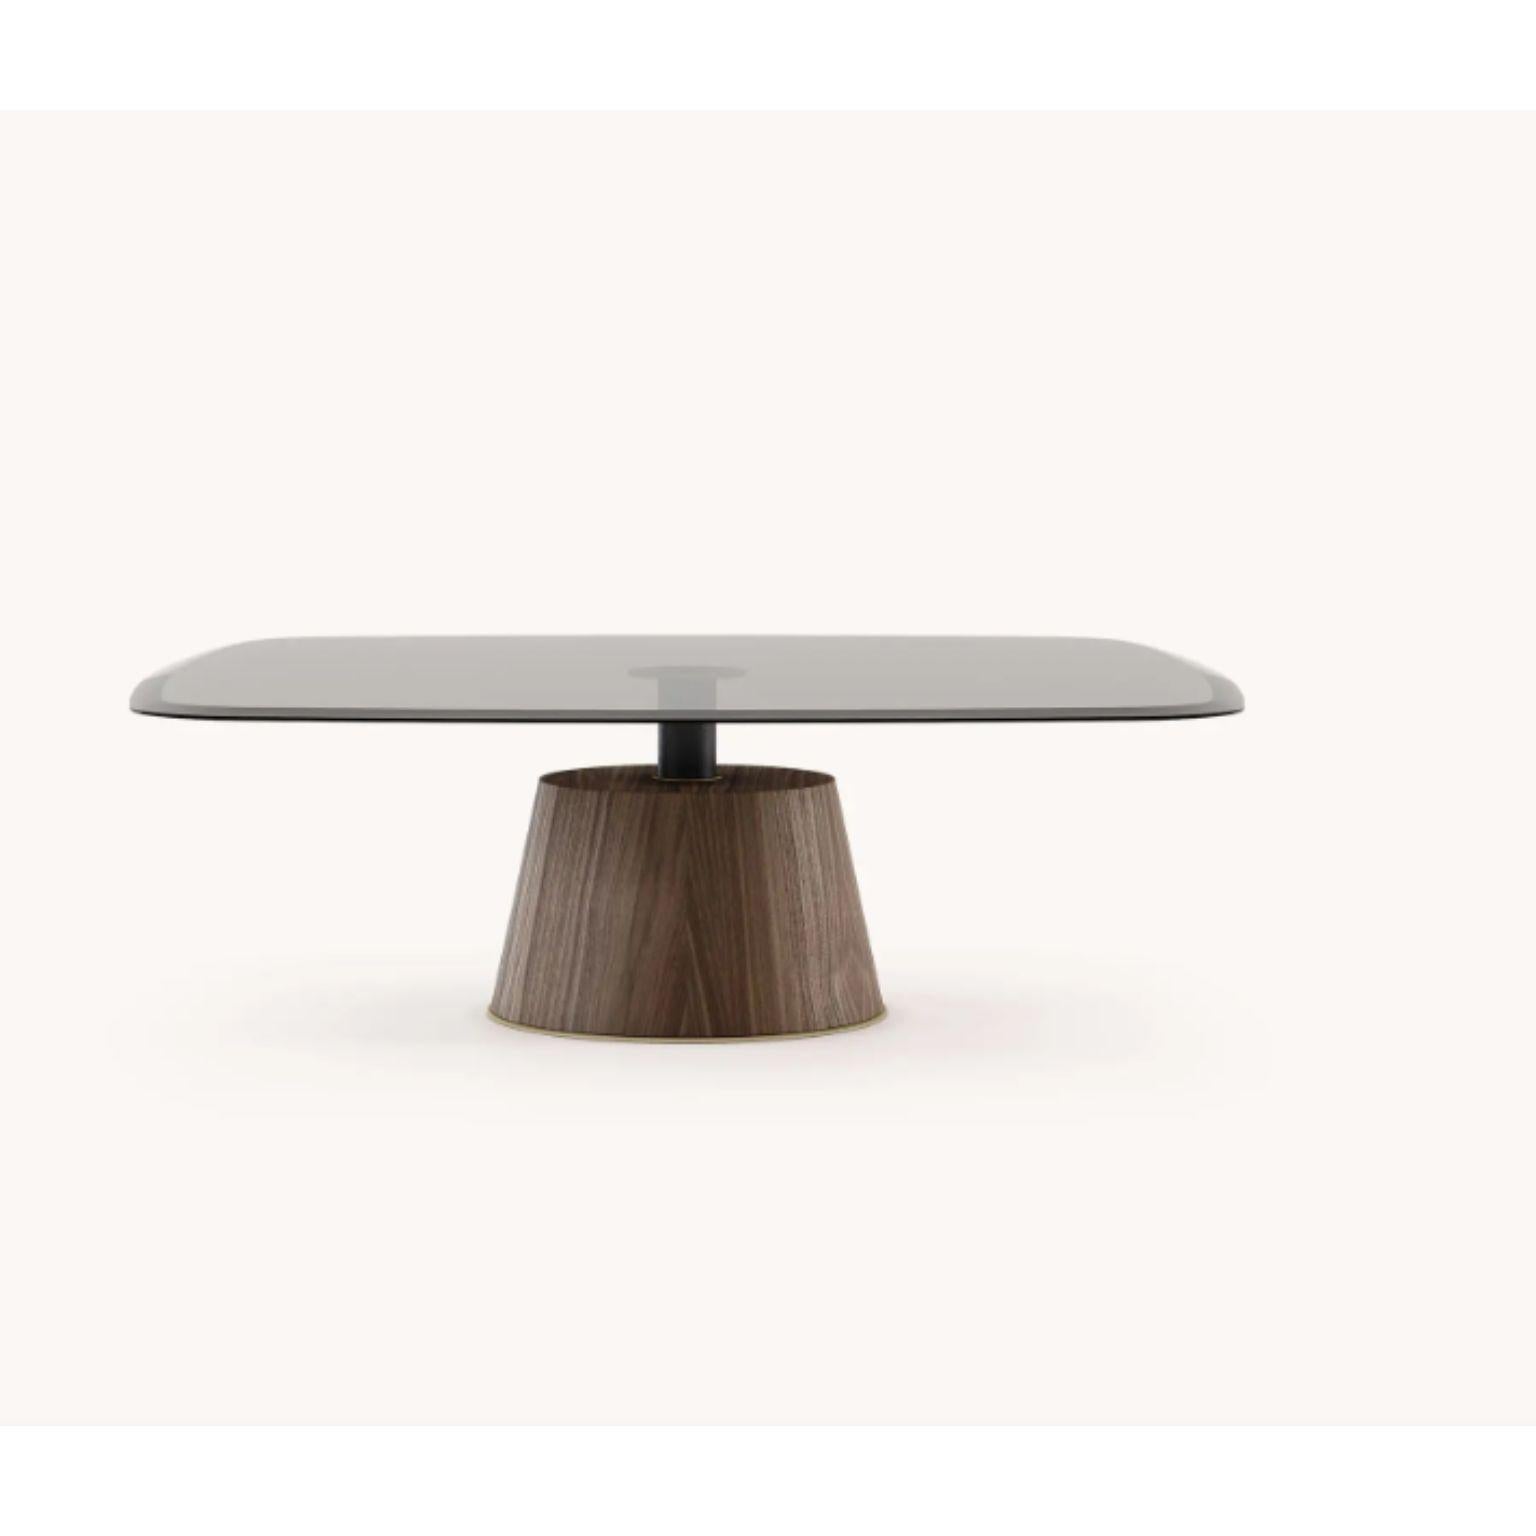 Panton center table by Domkapa
Dimensions: W 110 x D 110 x H 35 cm.
Materials: Natural walnut matte, bronze glass, black texturized steel, gold brushed stainless steel.
Also available in different materials.

Panton is a superb table with a